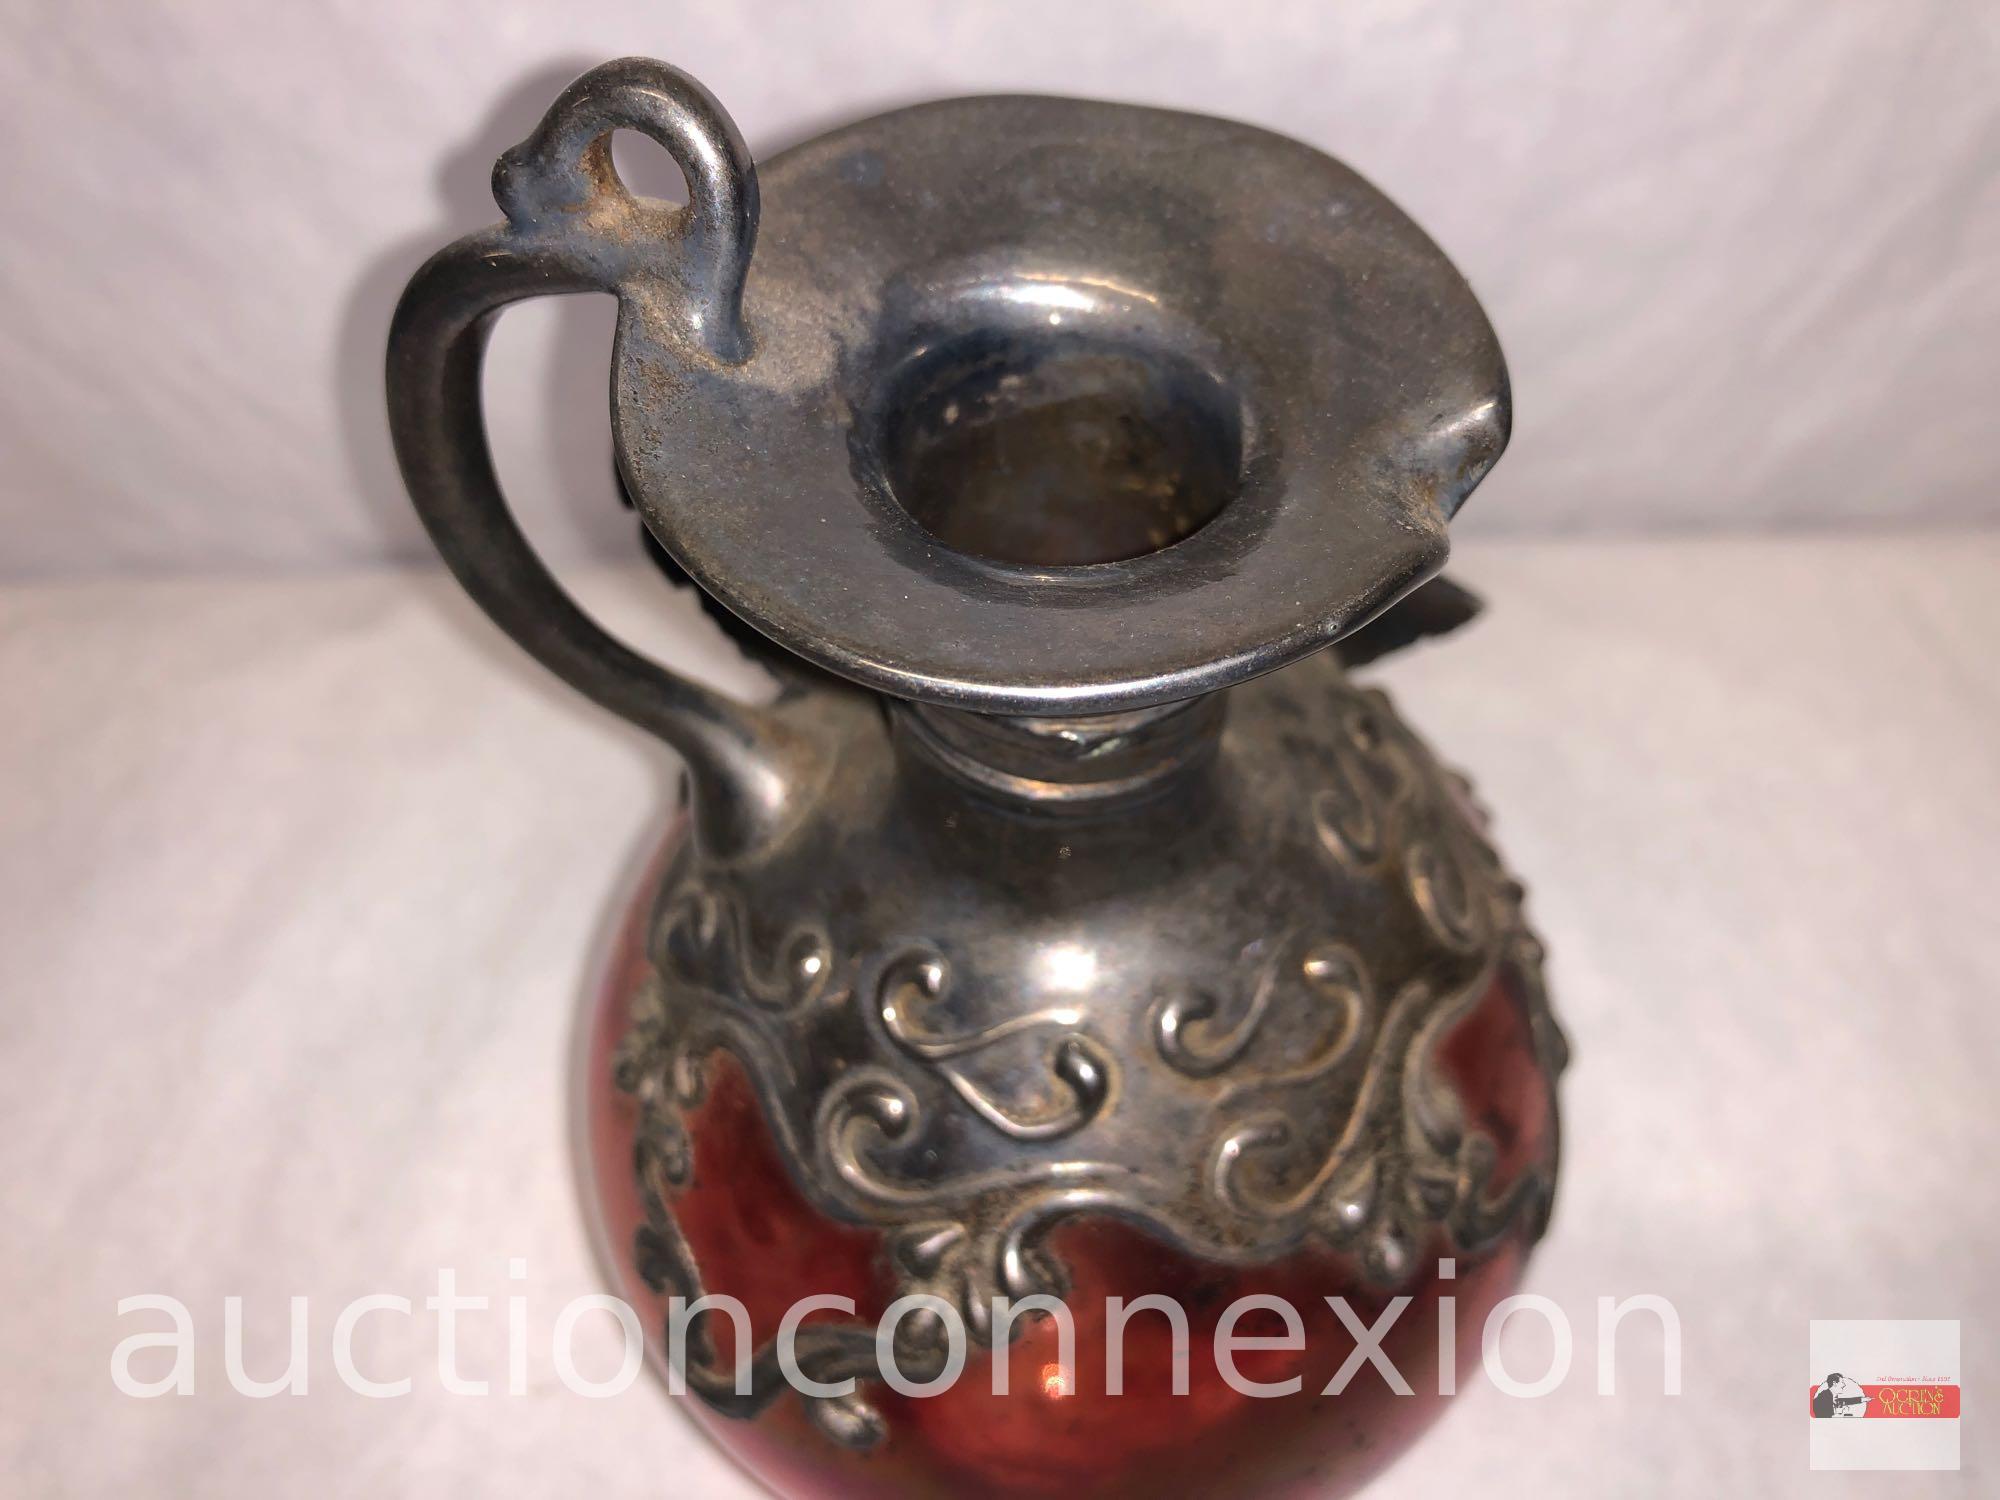 Pitcher - Hand blown glass pitcher with metal decor top